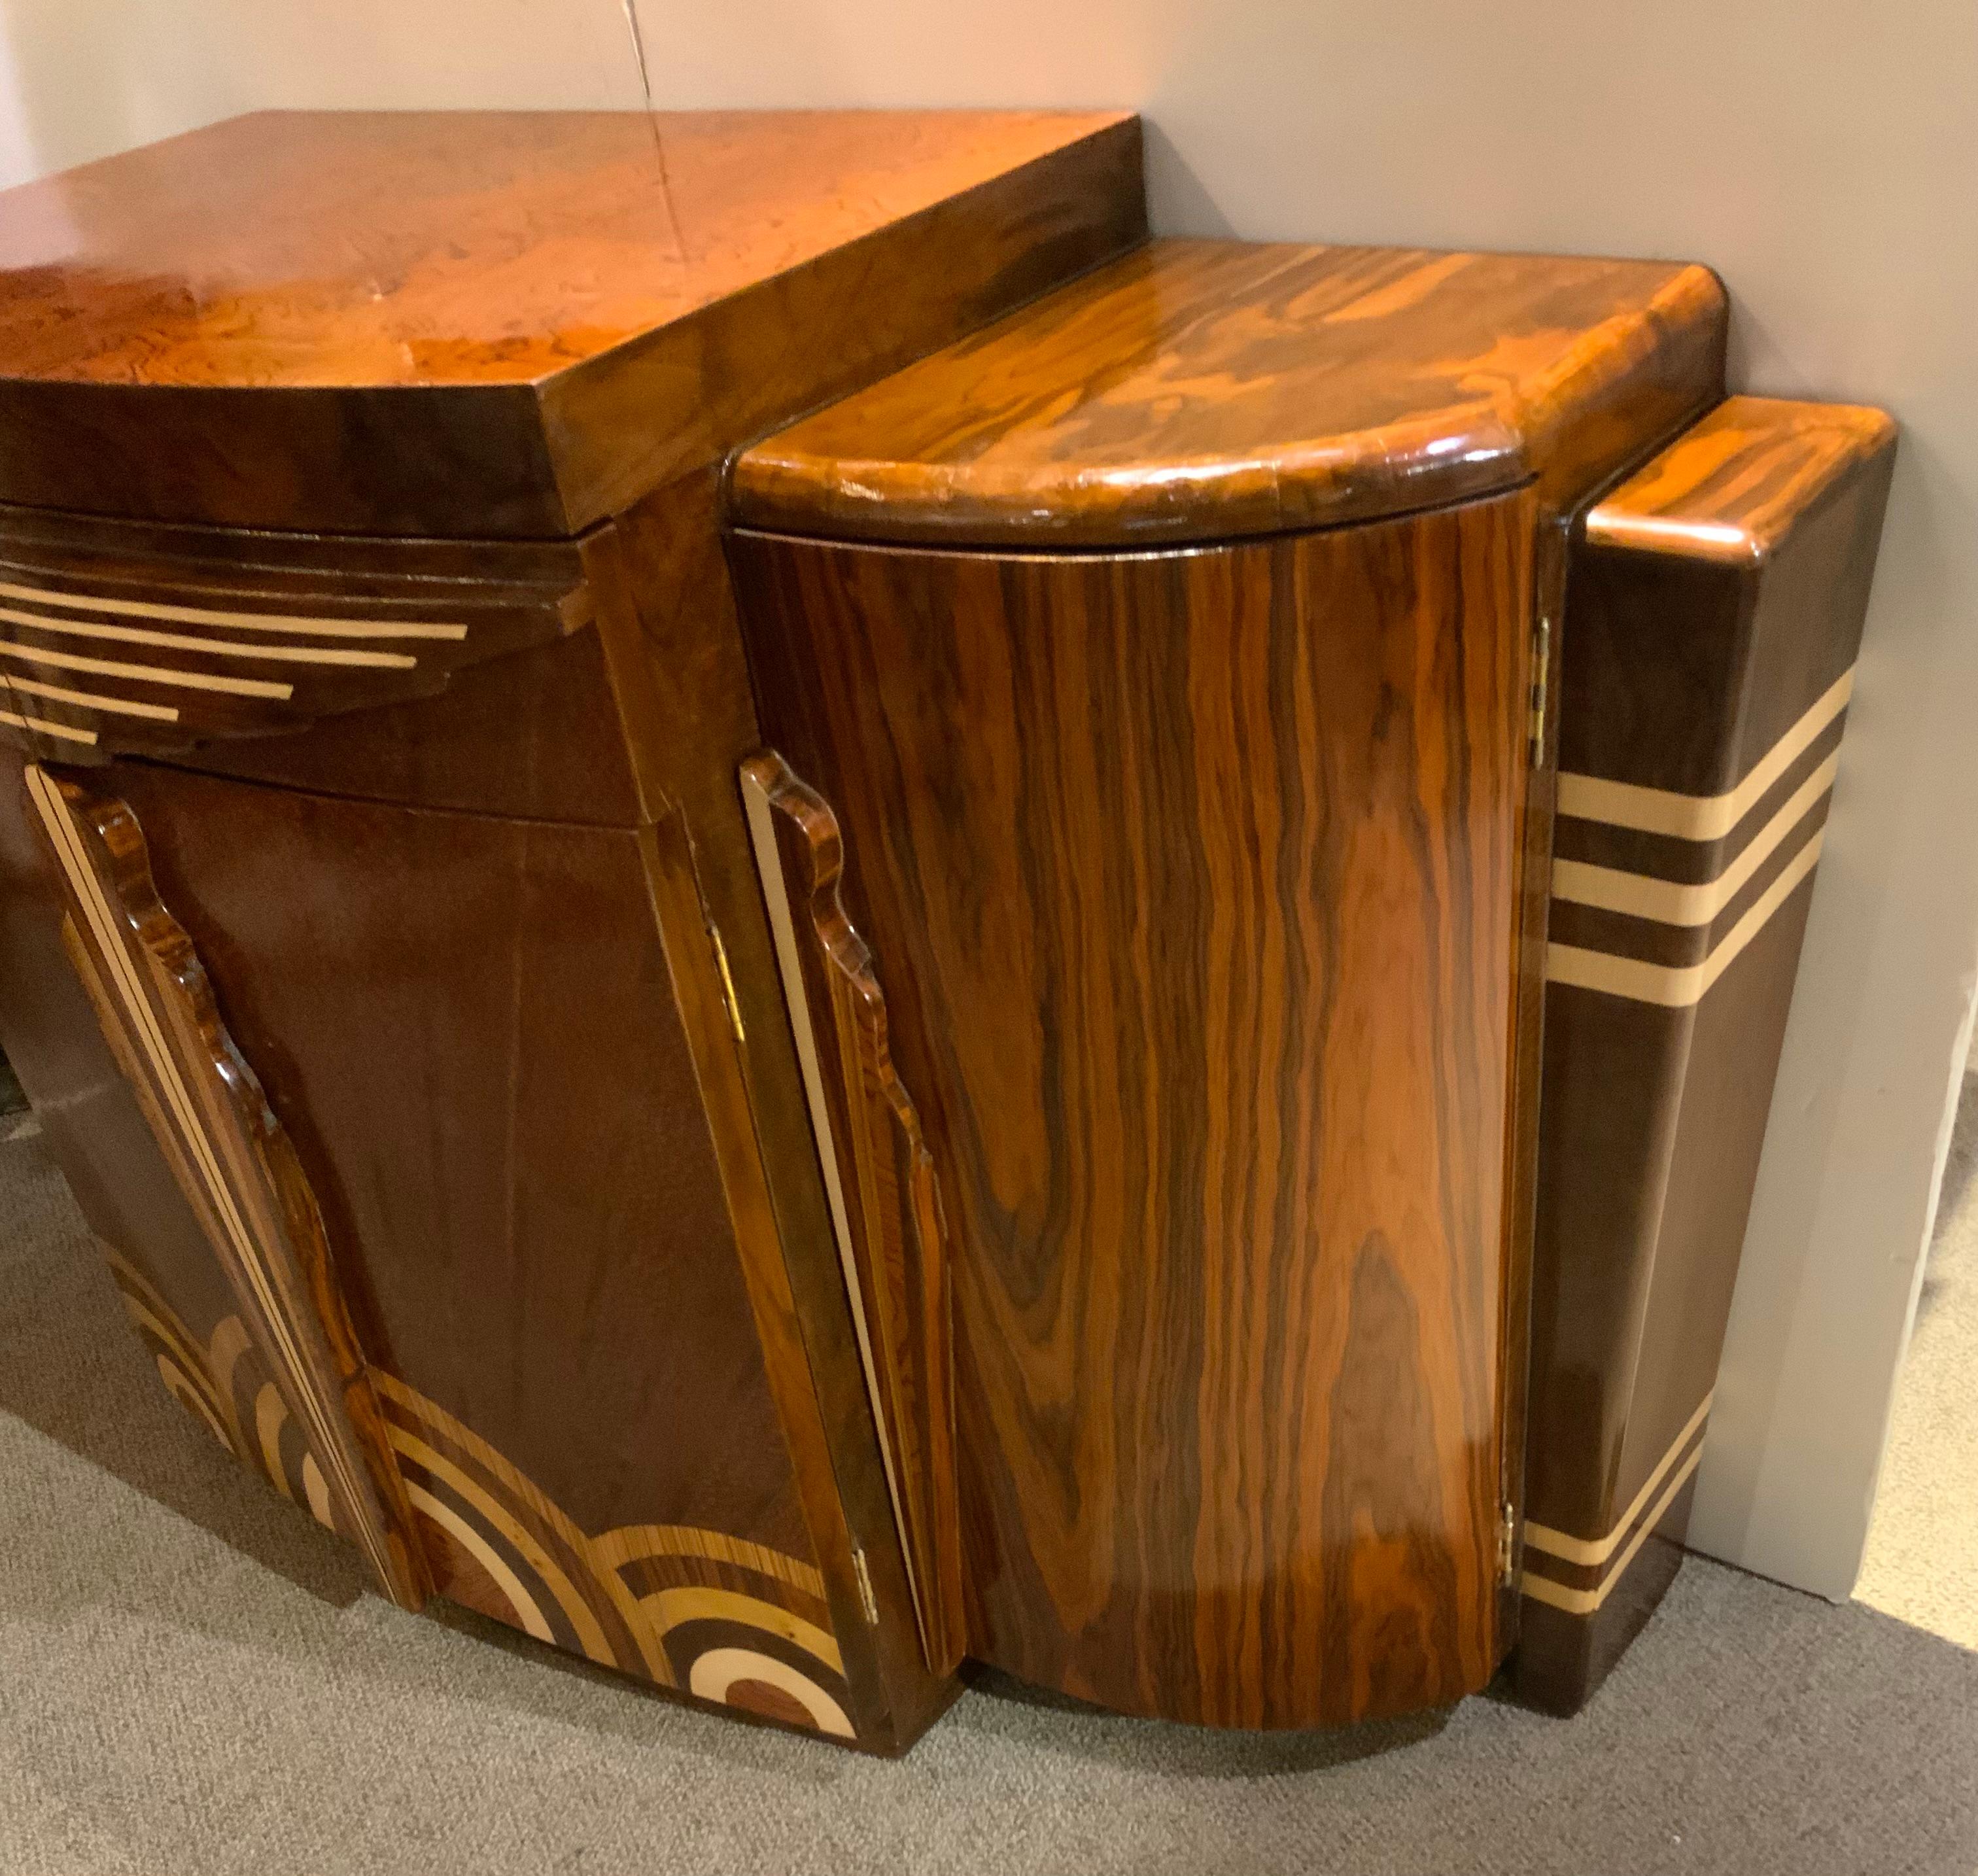 20th Century Art Deco Style four door bar with inlaid wood